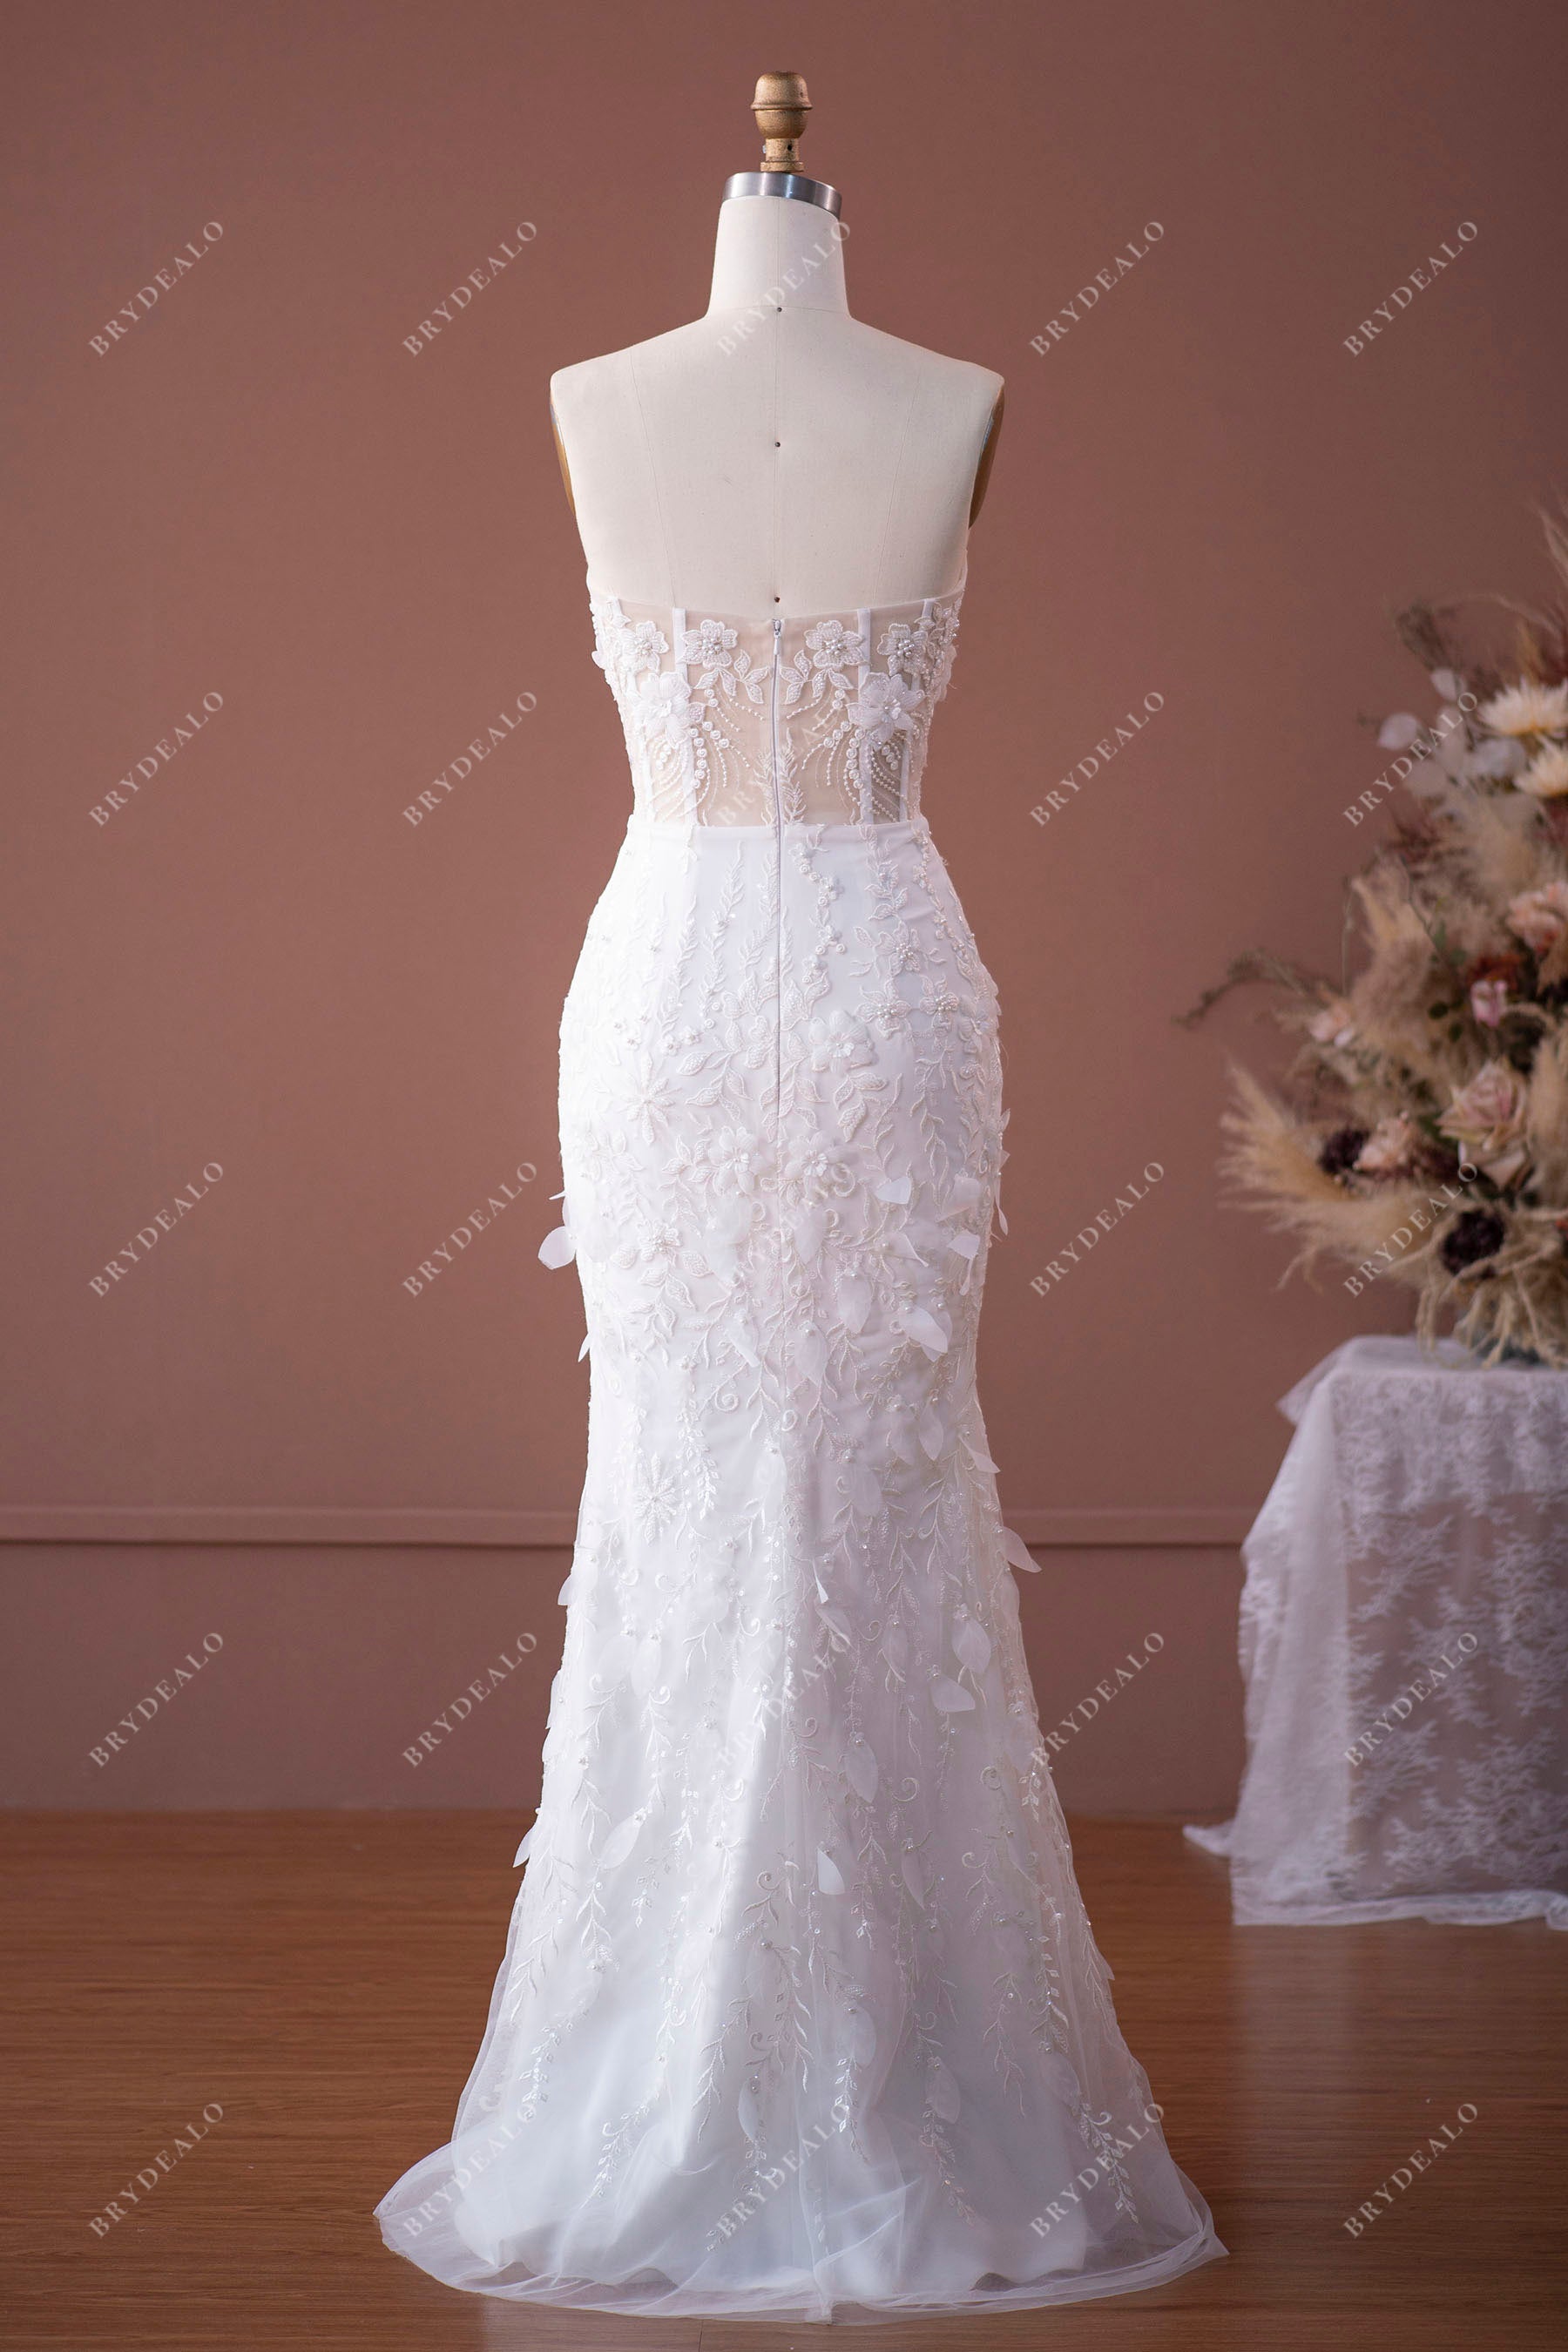 Sample Sale | Flower Corset Bridal Gown with Plump Tulle Overskirt